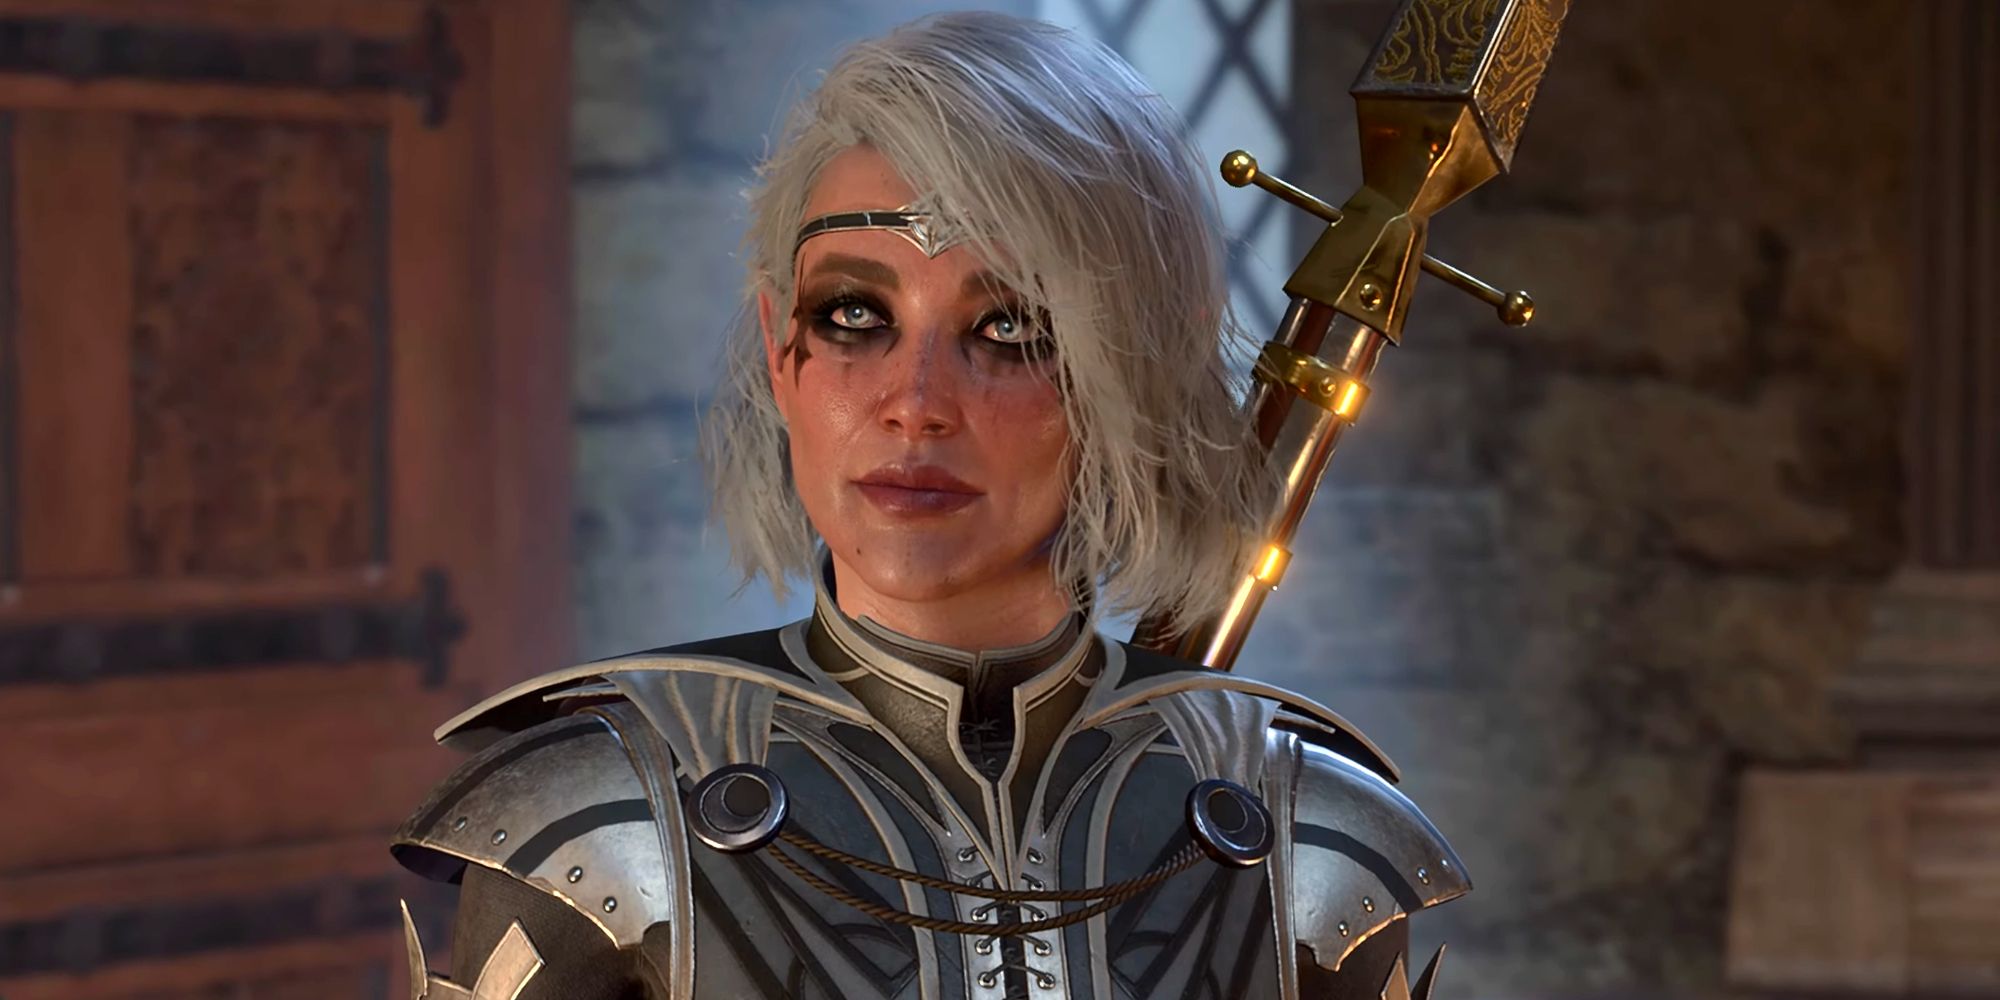 An NPC from Baldur's Gate 3, with white hair, silver armor, and a gold spear on her back.